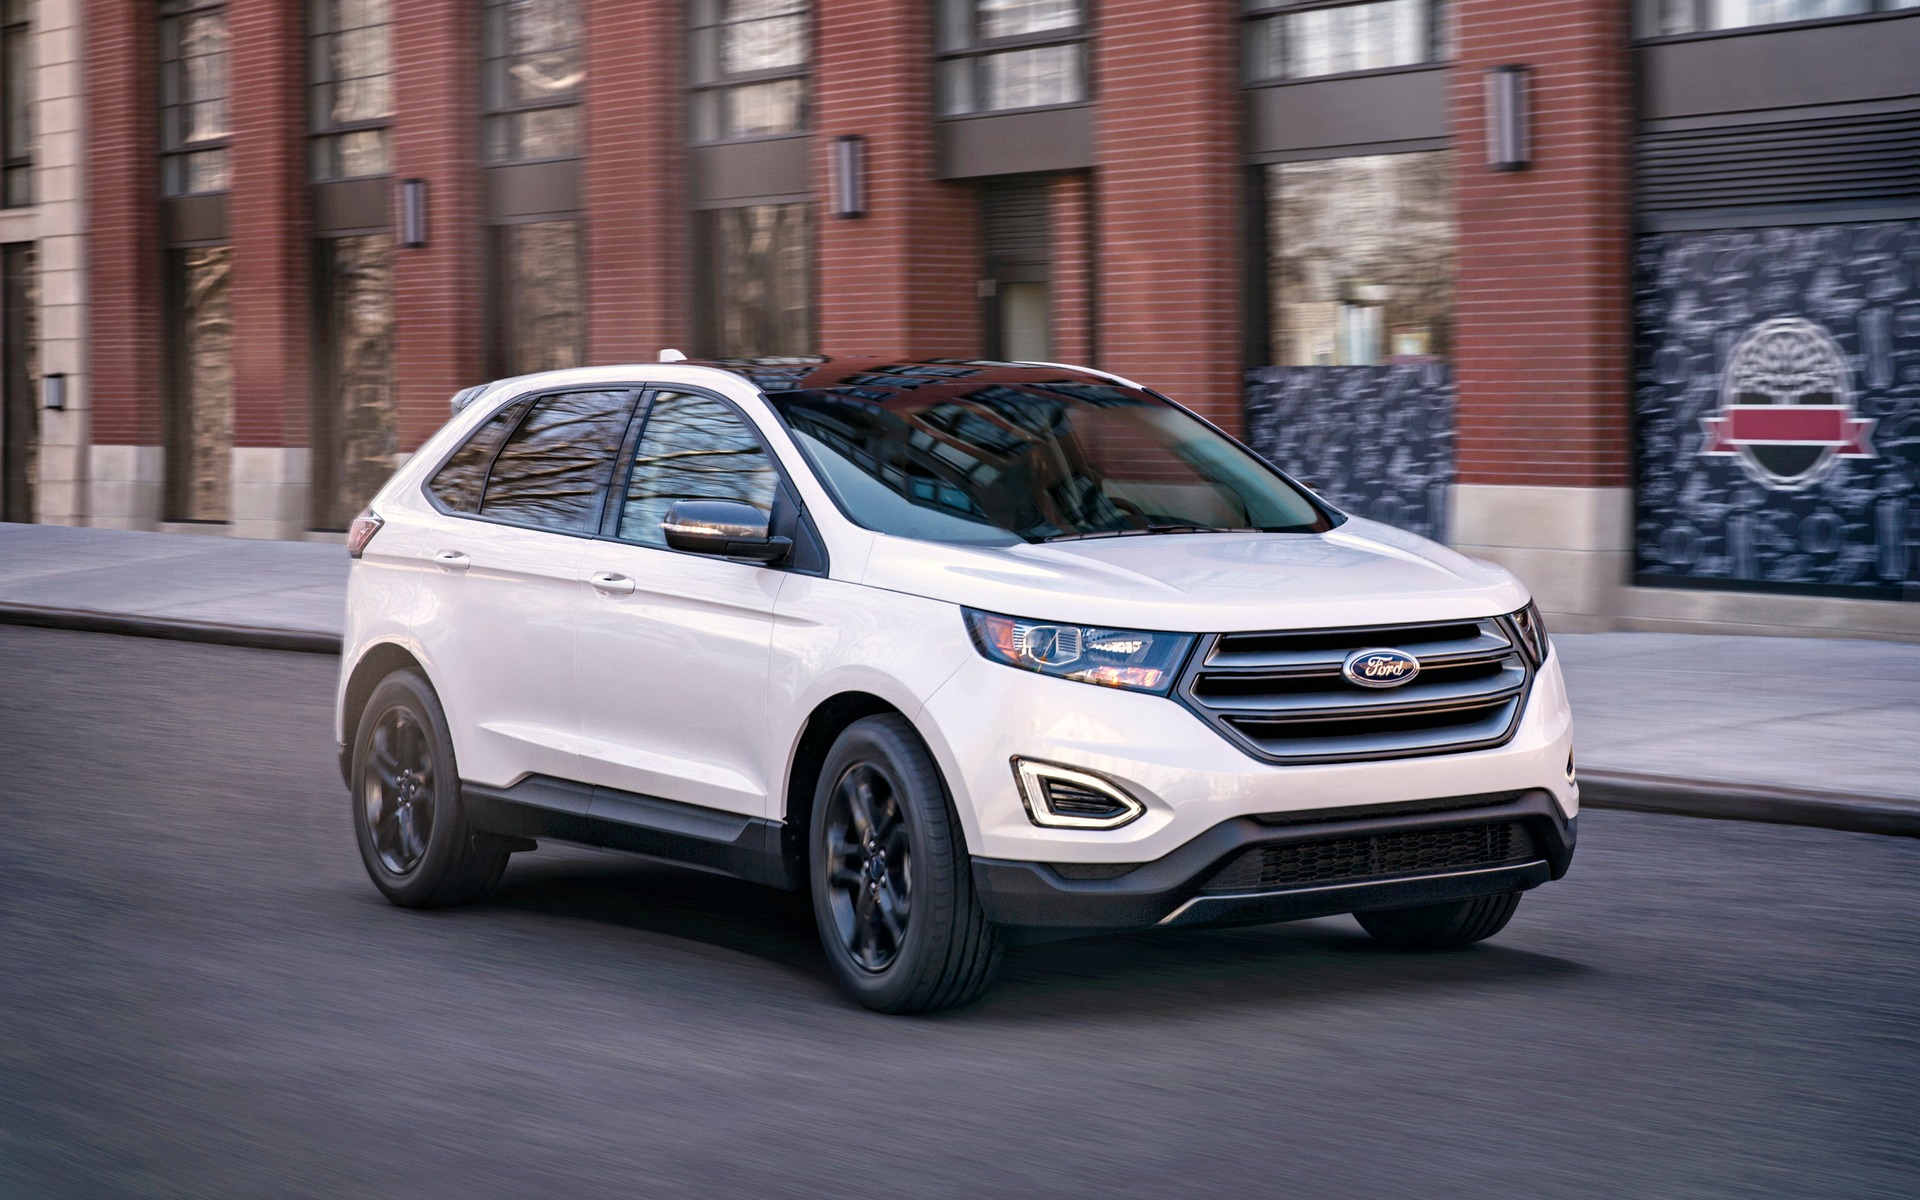 2018 Ford Edge Sport AWD Price & Specifications - The Car Guide